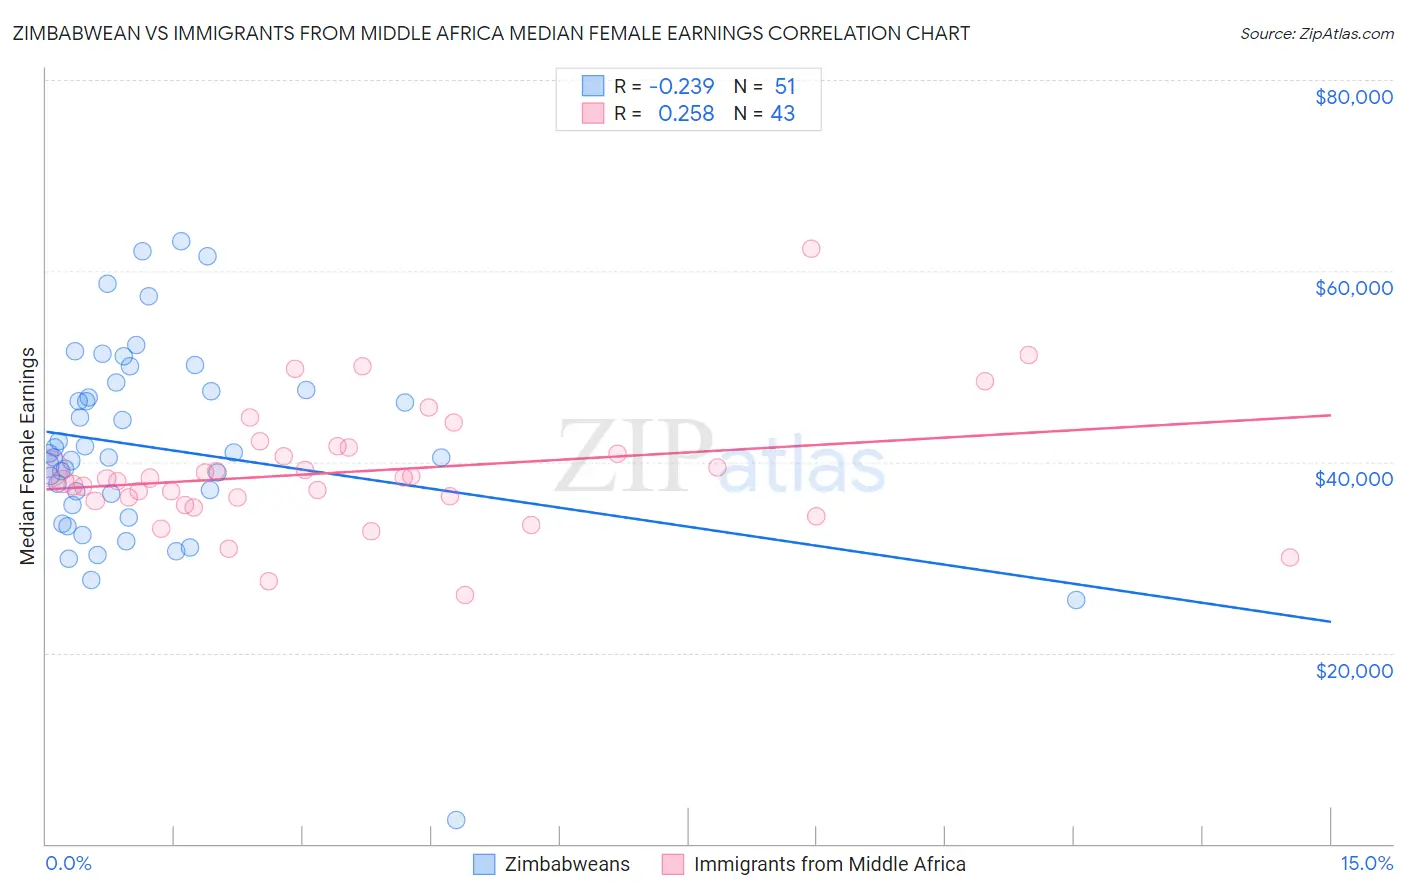 Zimbabwean vs Immigrants from Middle Africa Median Female Earnings